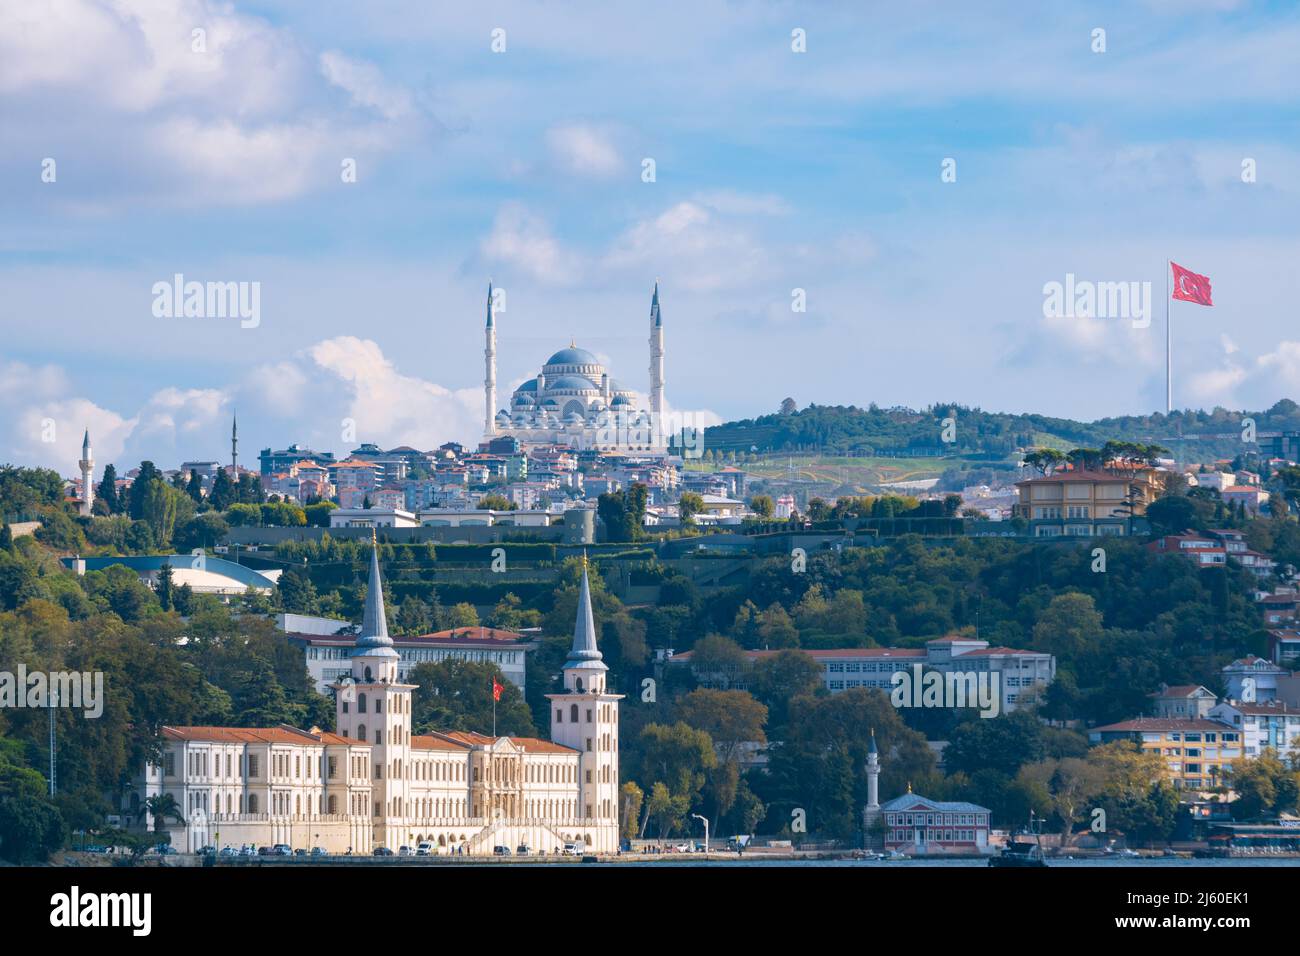 Camlica Tower and Kuleli Military School in Istanbul from Arnavutkoy District. Landmarks of Istanbul background photo. New and old Turkey concept phot Stock Photo